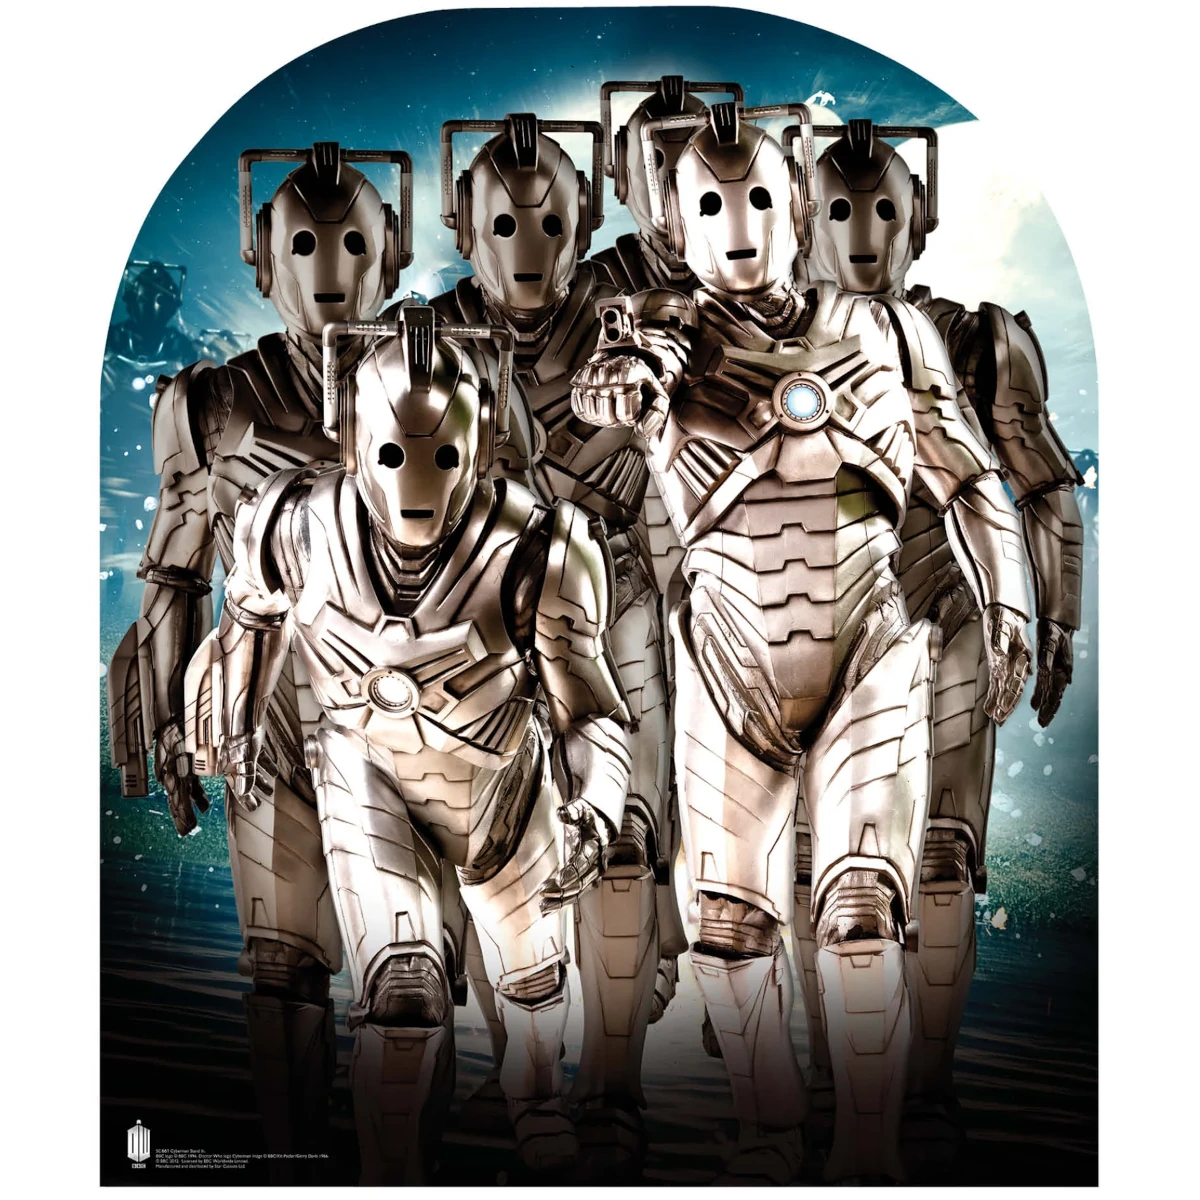 SC661 Cyberman (Doctor Who) Official Child Size Stand-In Cardboard Cutout Standee Front